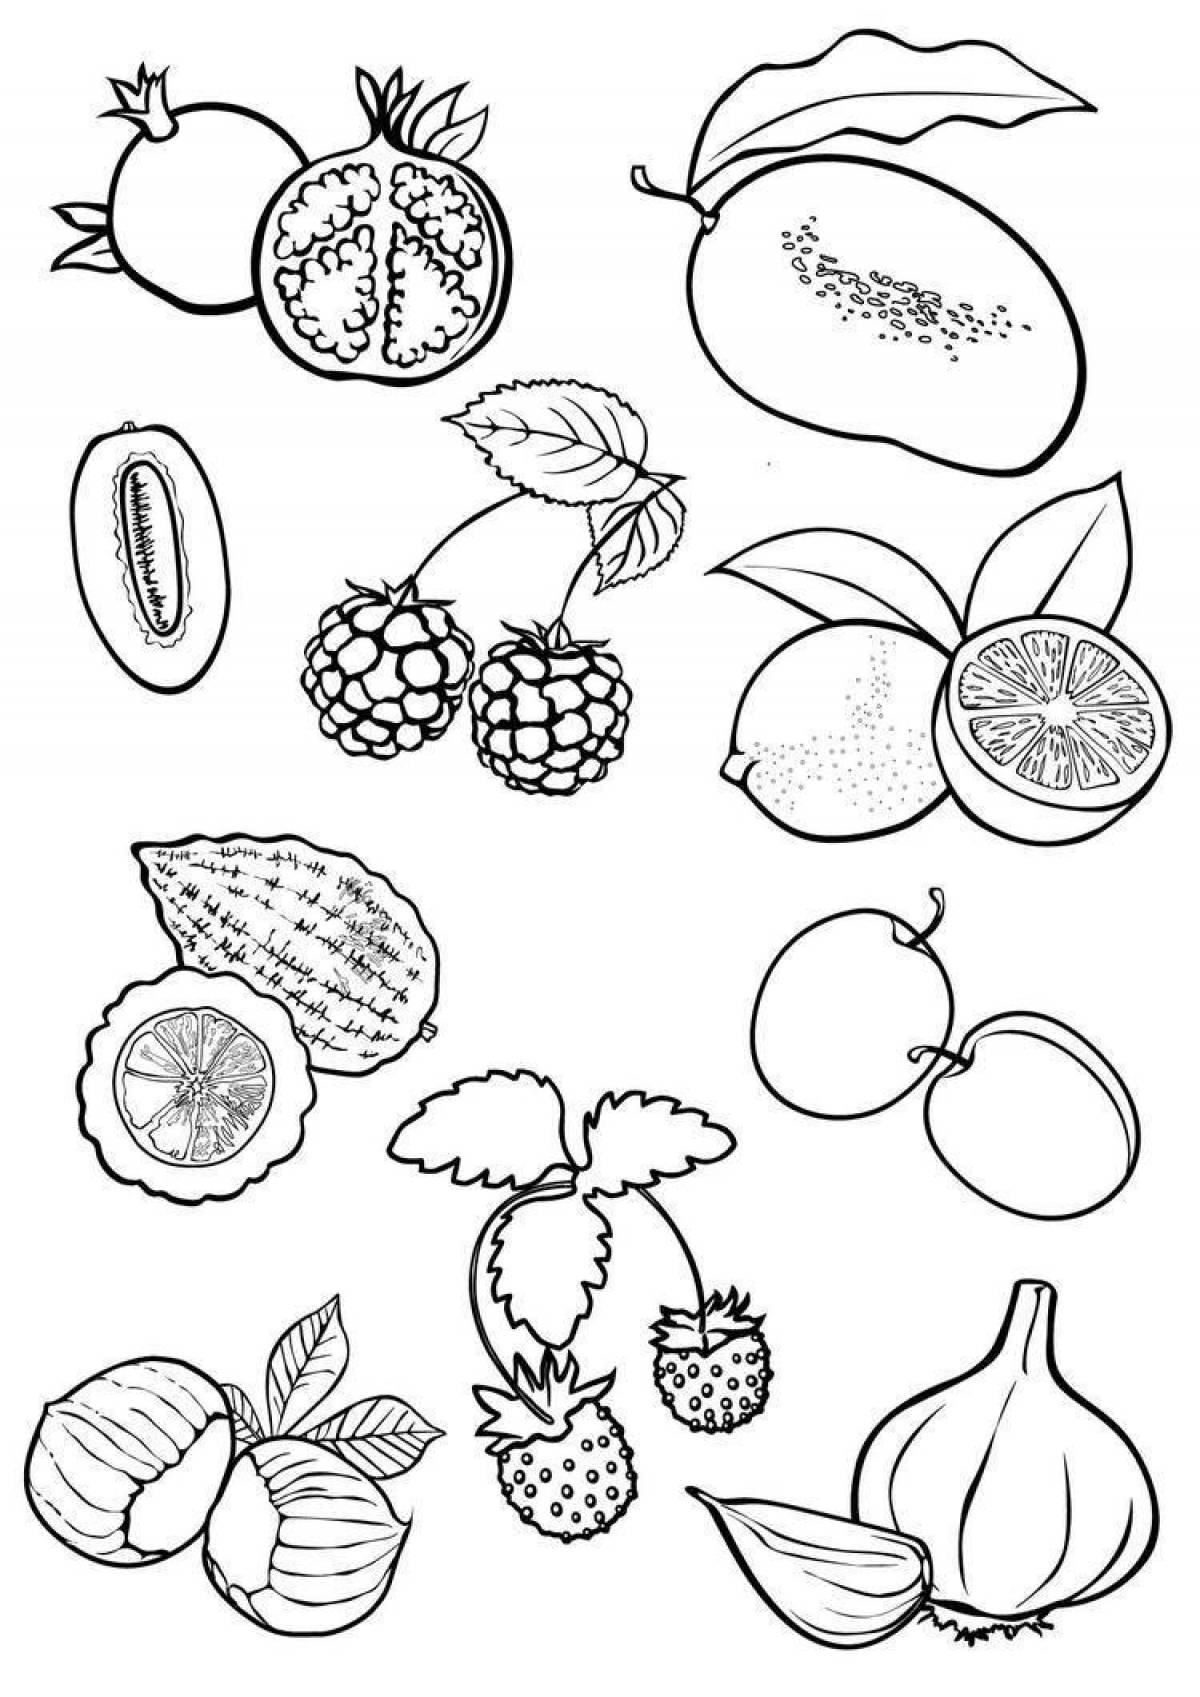 Innovative berries and fruits coloring book for kids